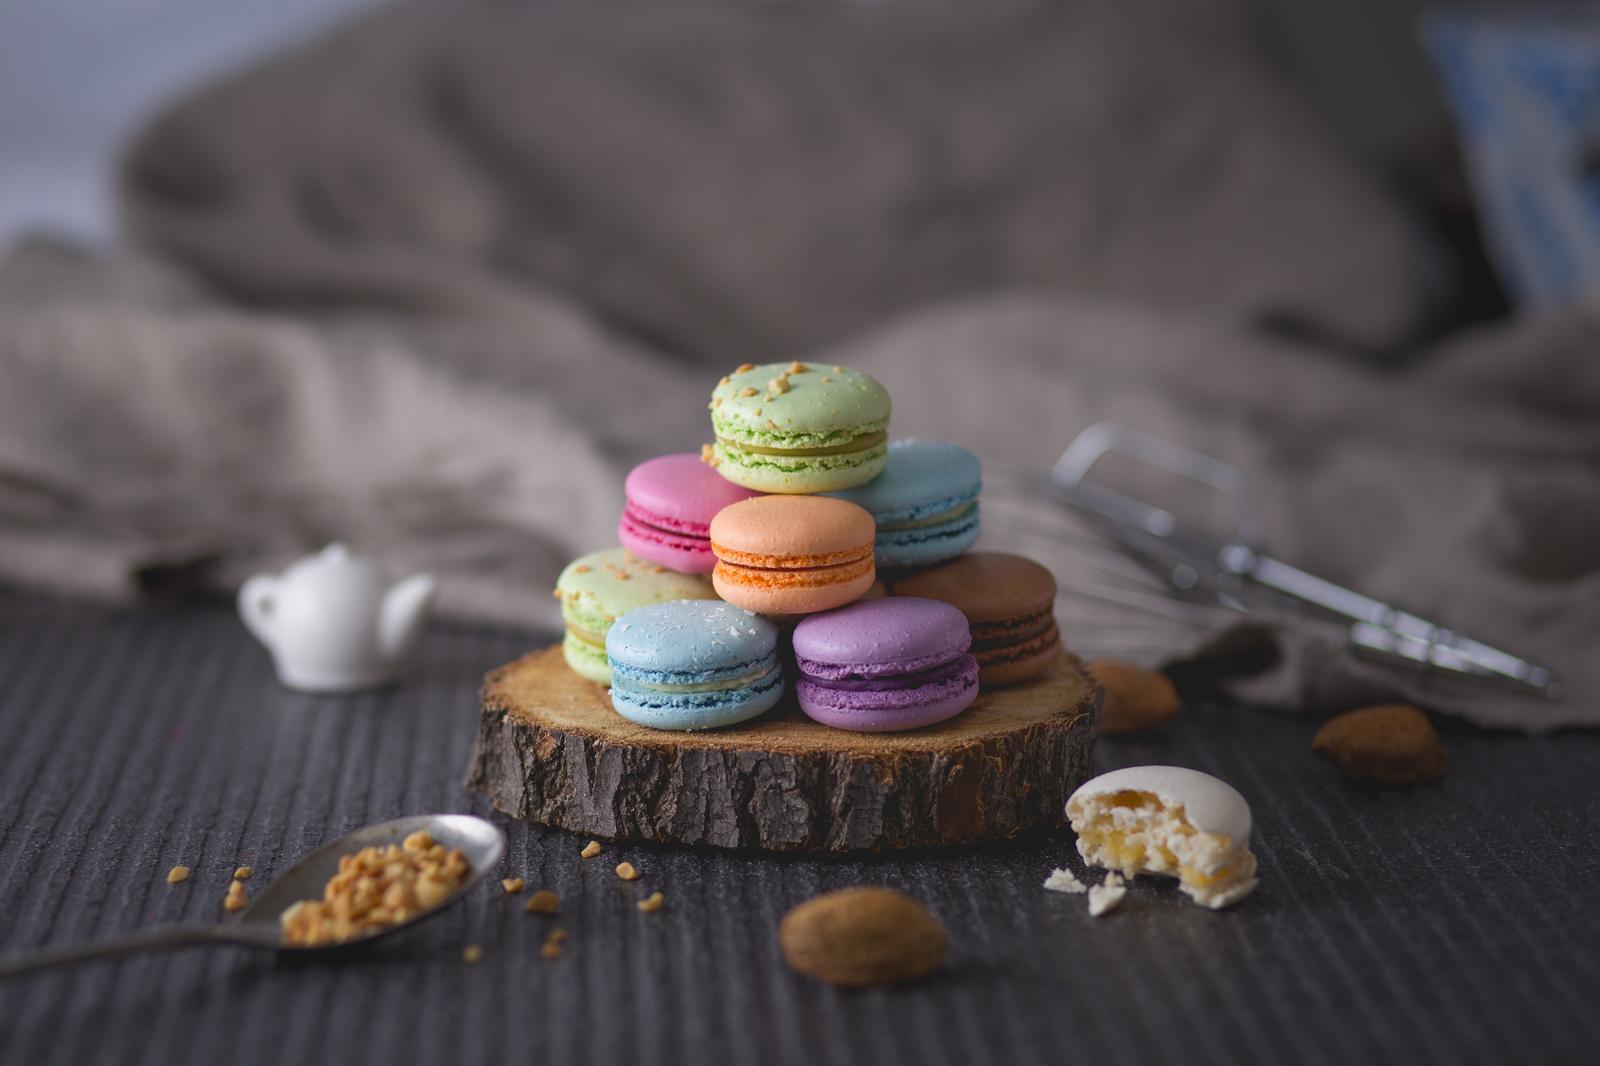 This Picture Quiz Will Challenge Your Knowledge of Classic French Desserts 🥐 – Can You Score High? Macarons